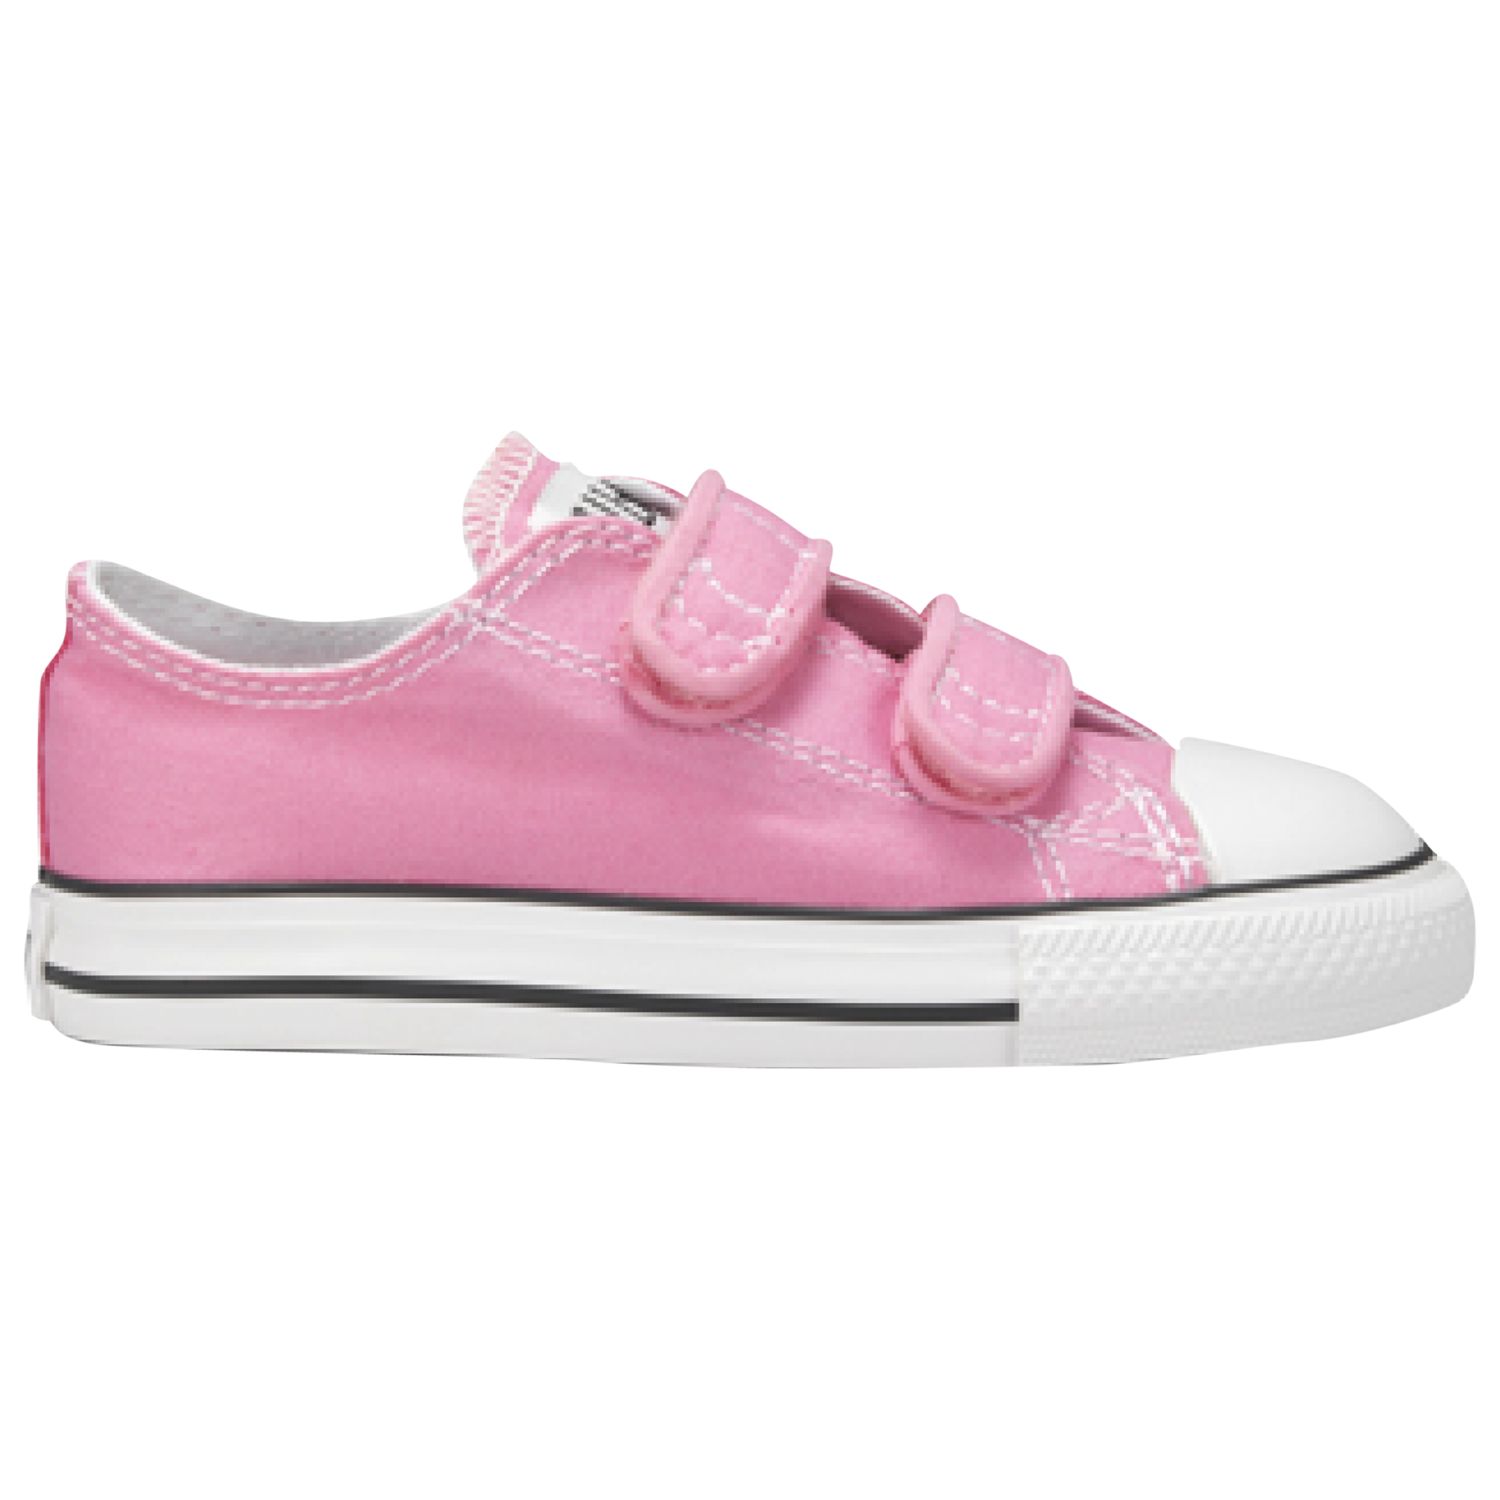 Converse Children's Chuck Taylor All Star Riptape Trainers, Pink, 2 Jnr